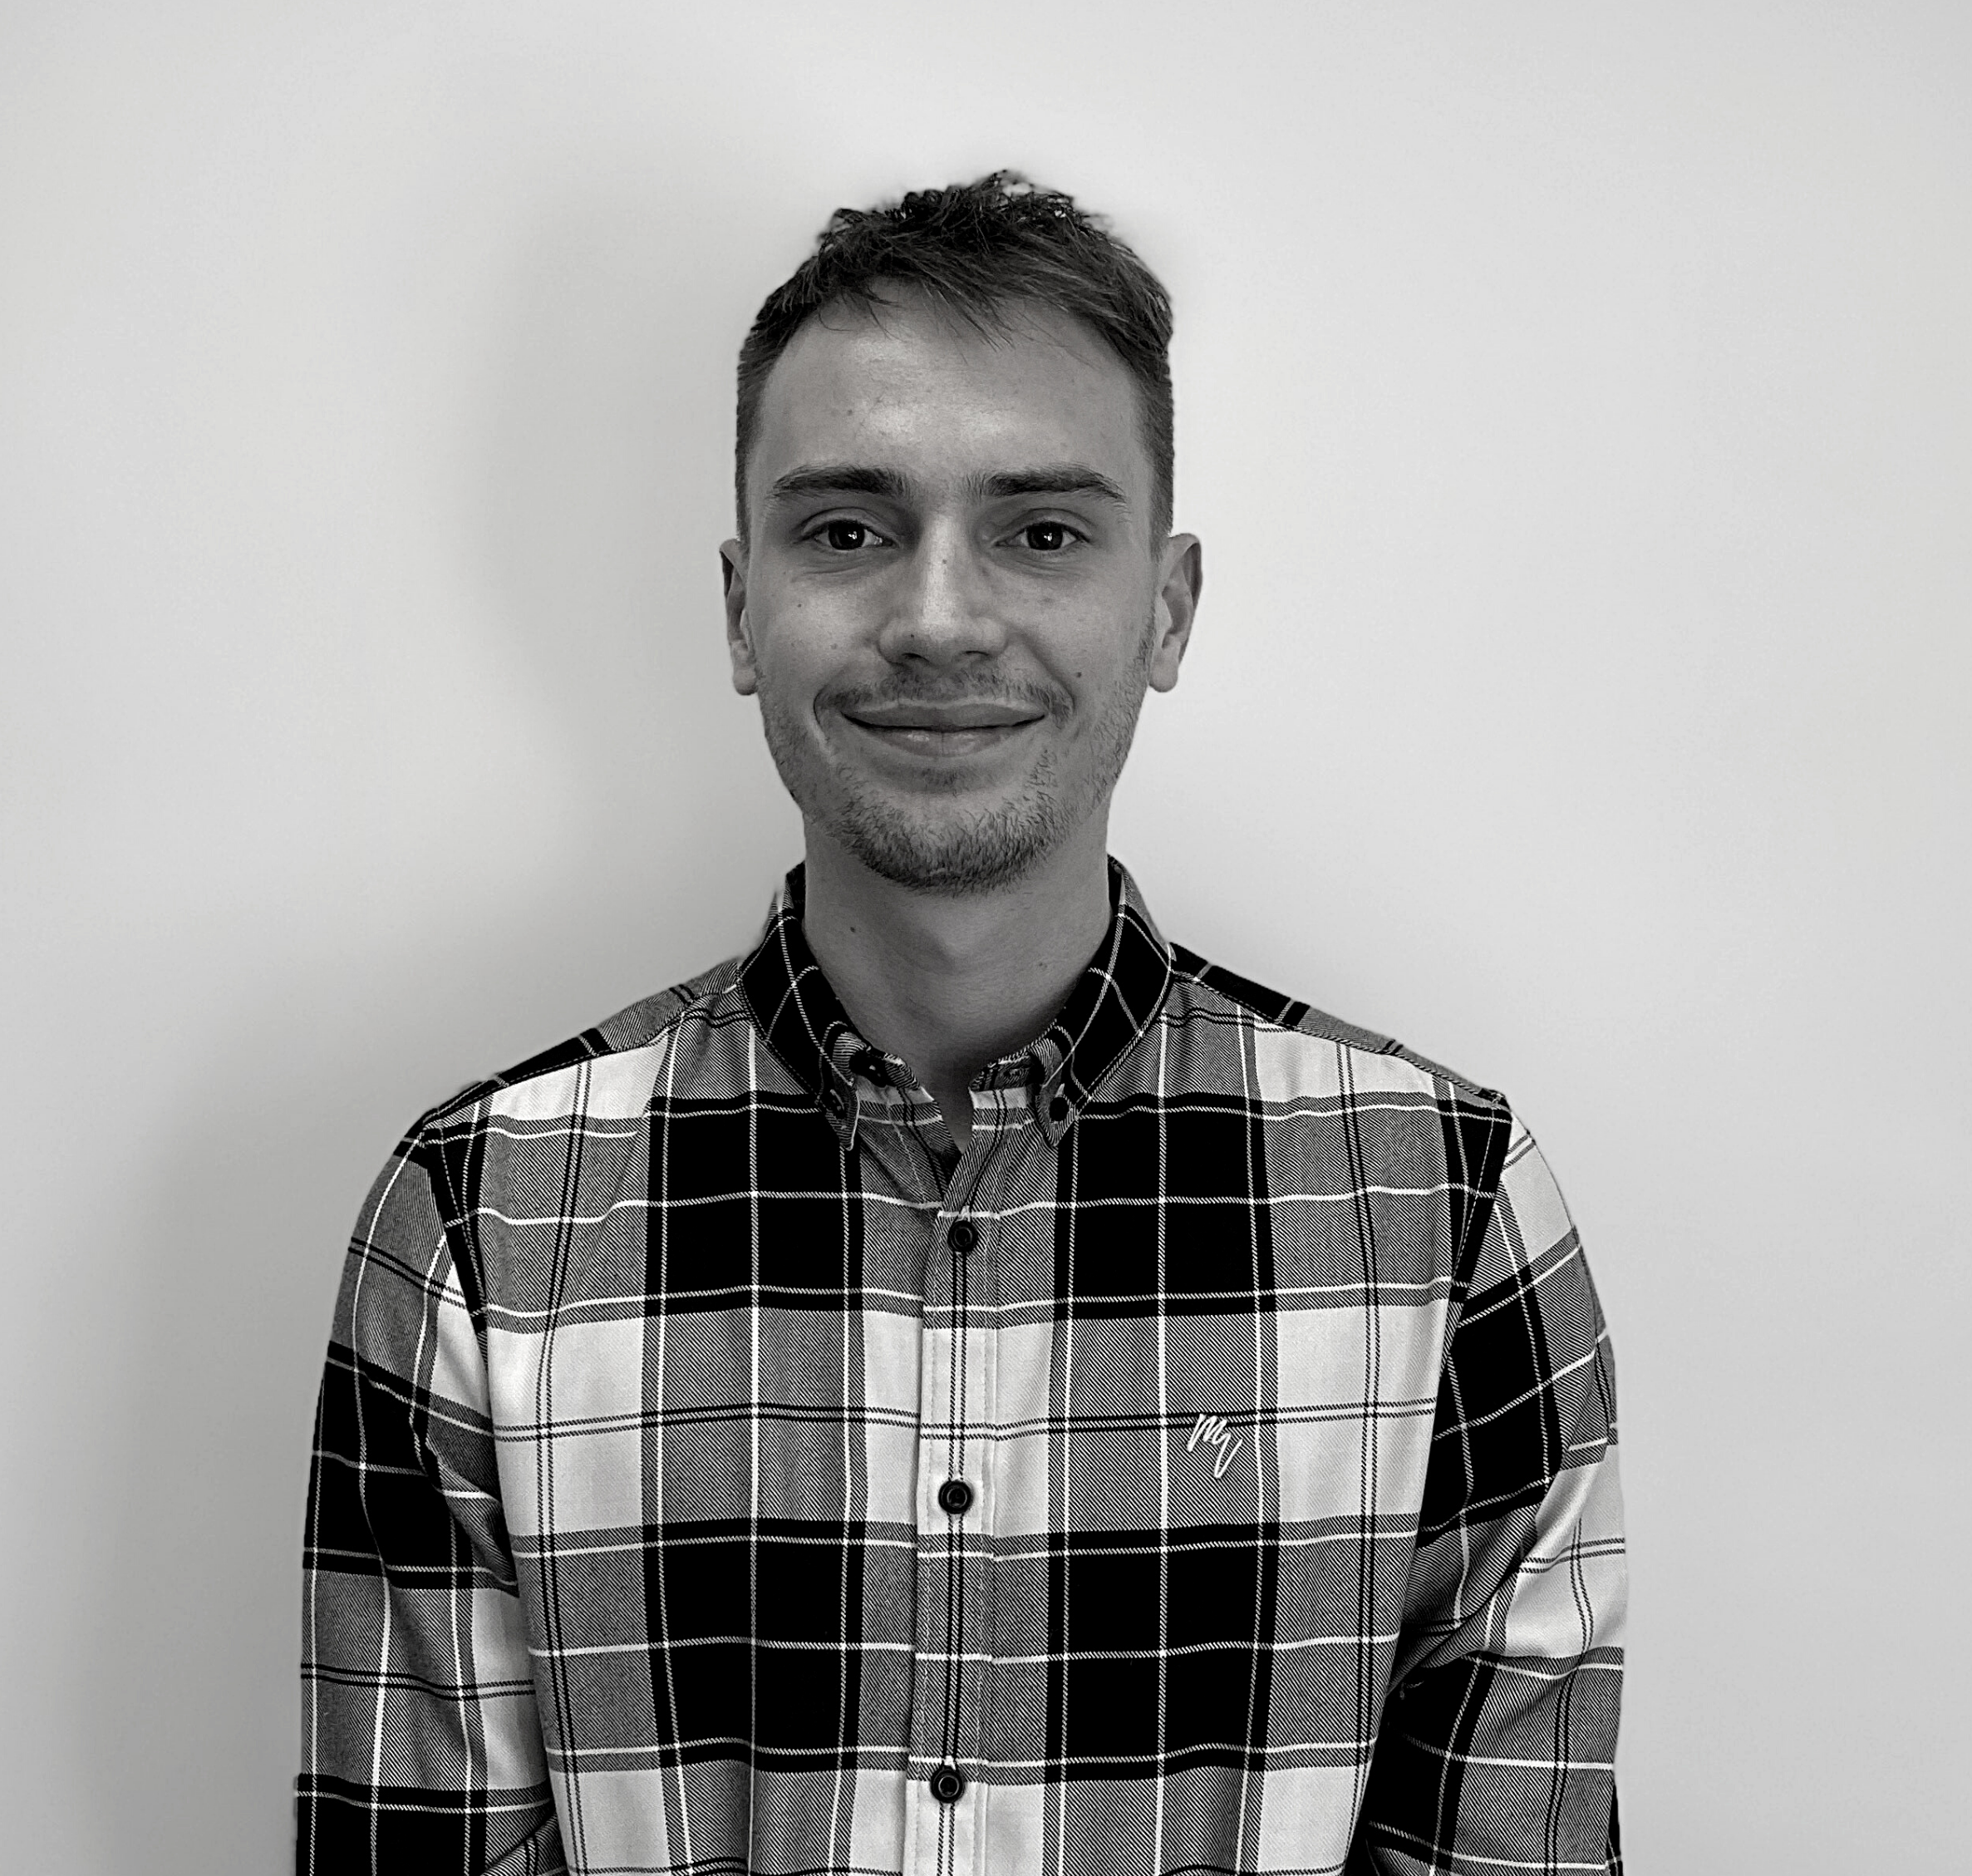 Our newest team member: account manager, Louie Callegari